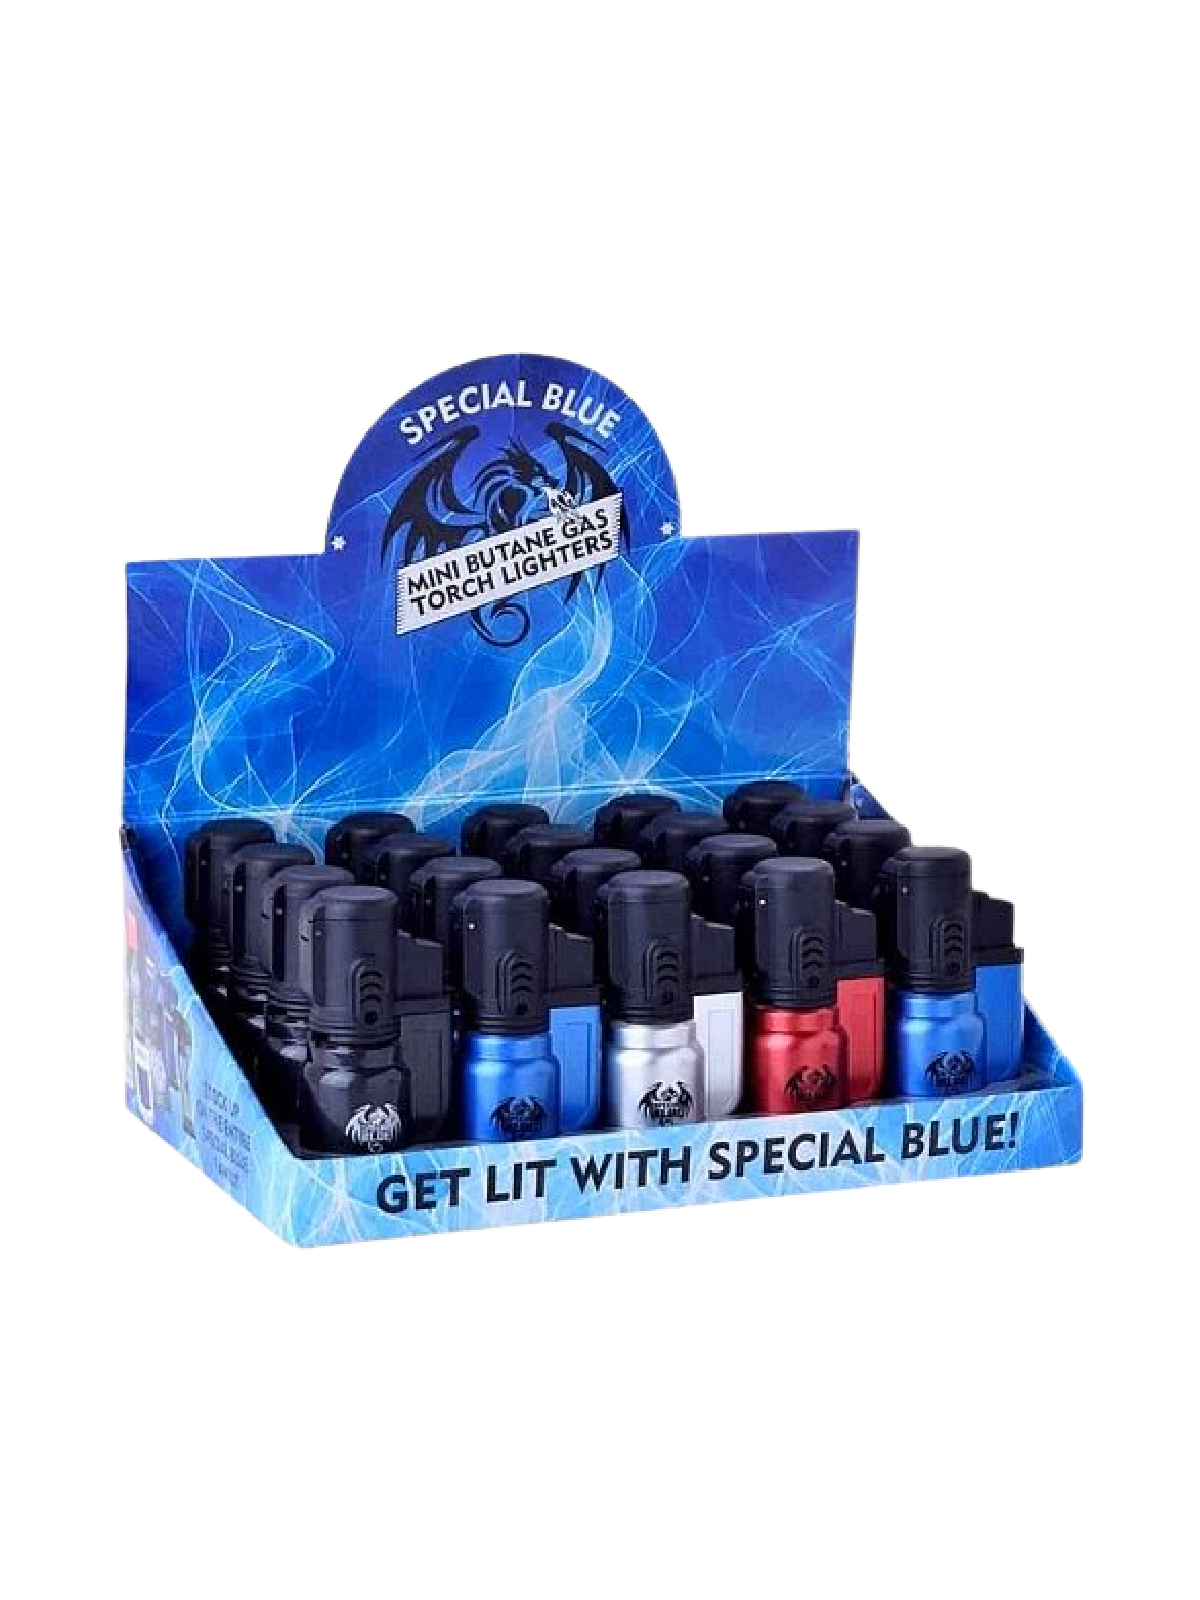 SPECIAL BLUE BULLET METAL TORCH 20 CT